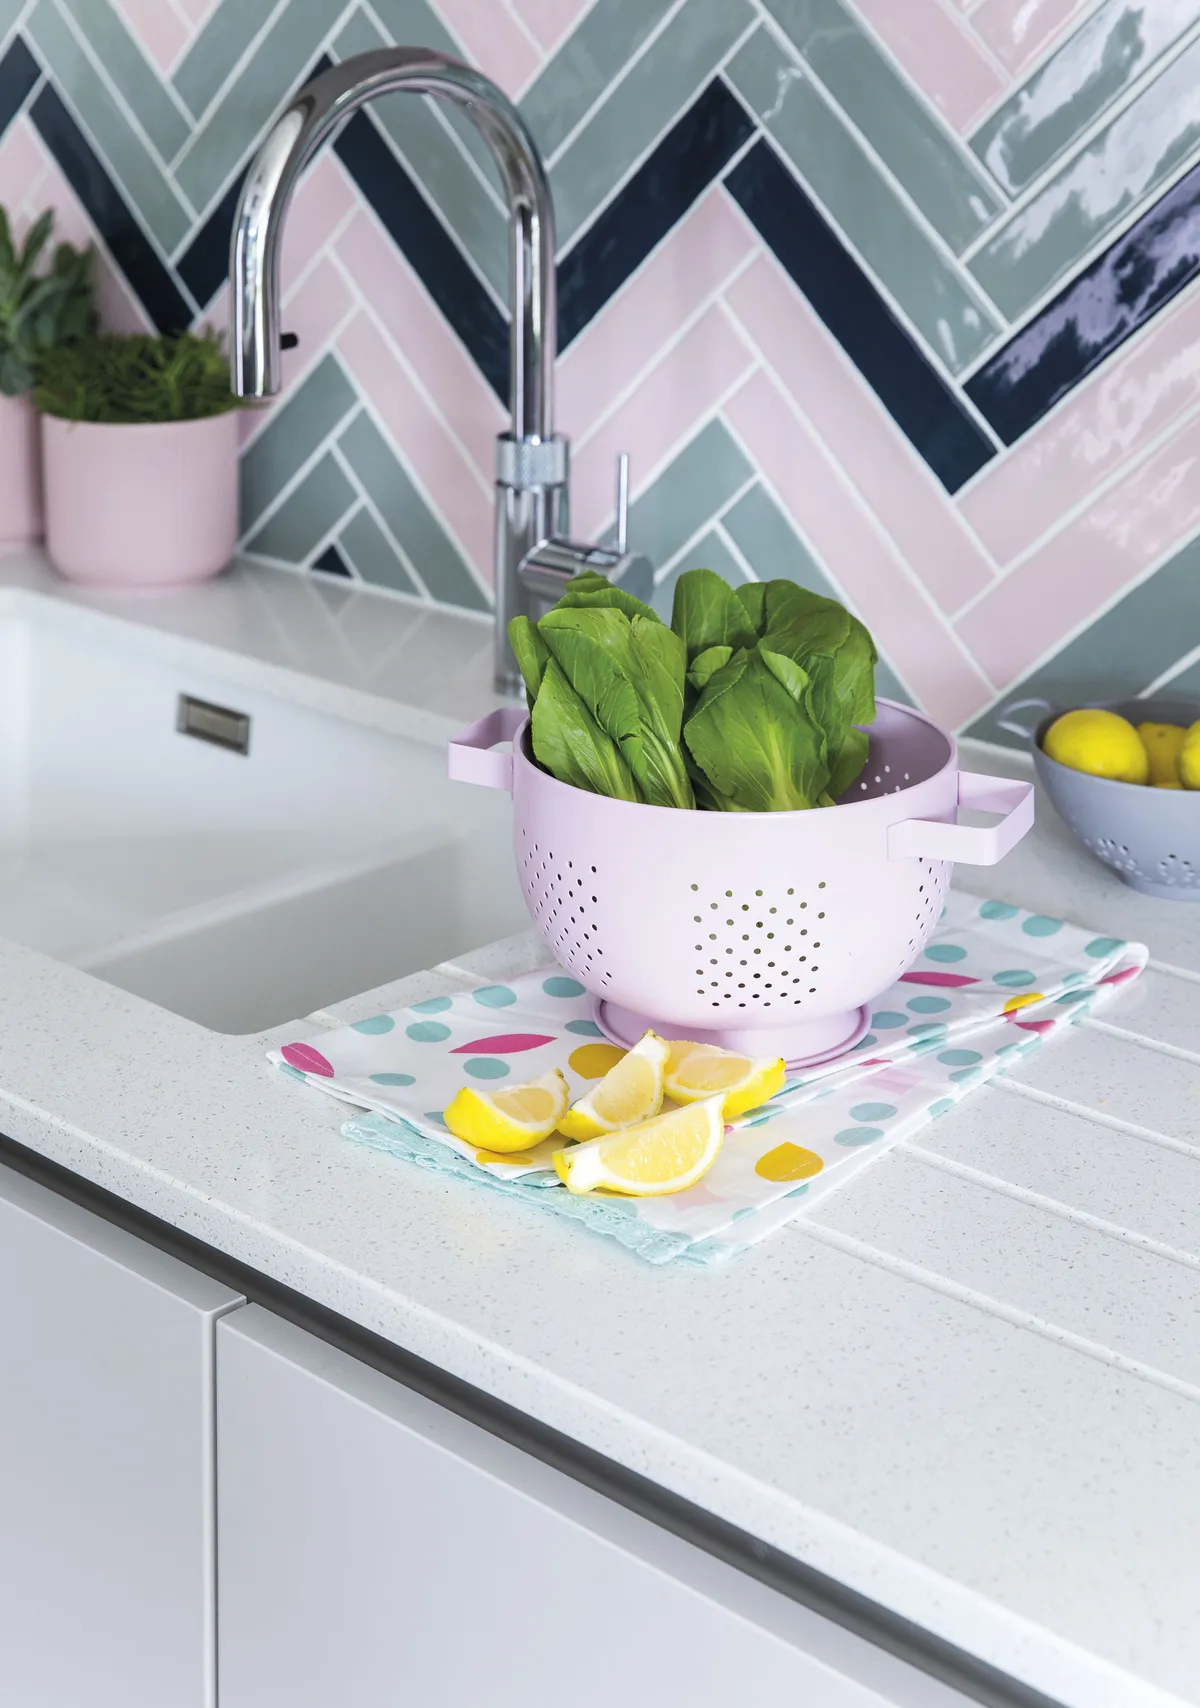 Rebecca designed this colourful herringbone splashback, which makes a stunning focal point and echoes the pattern on the floor